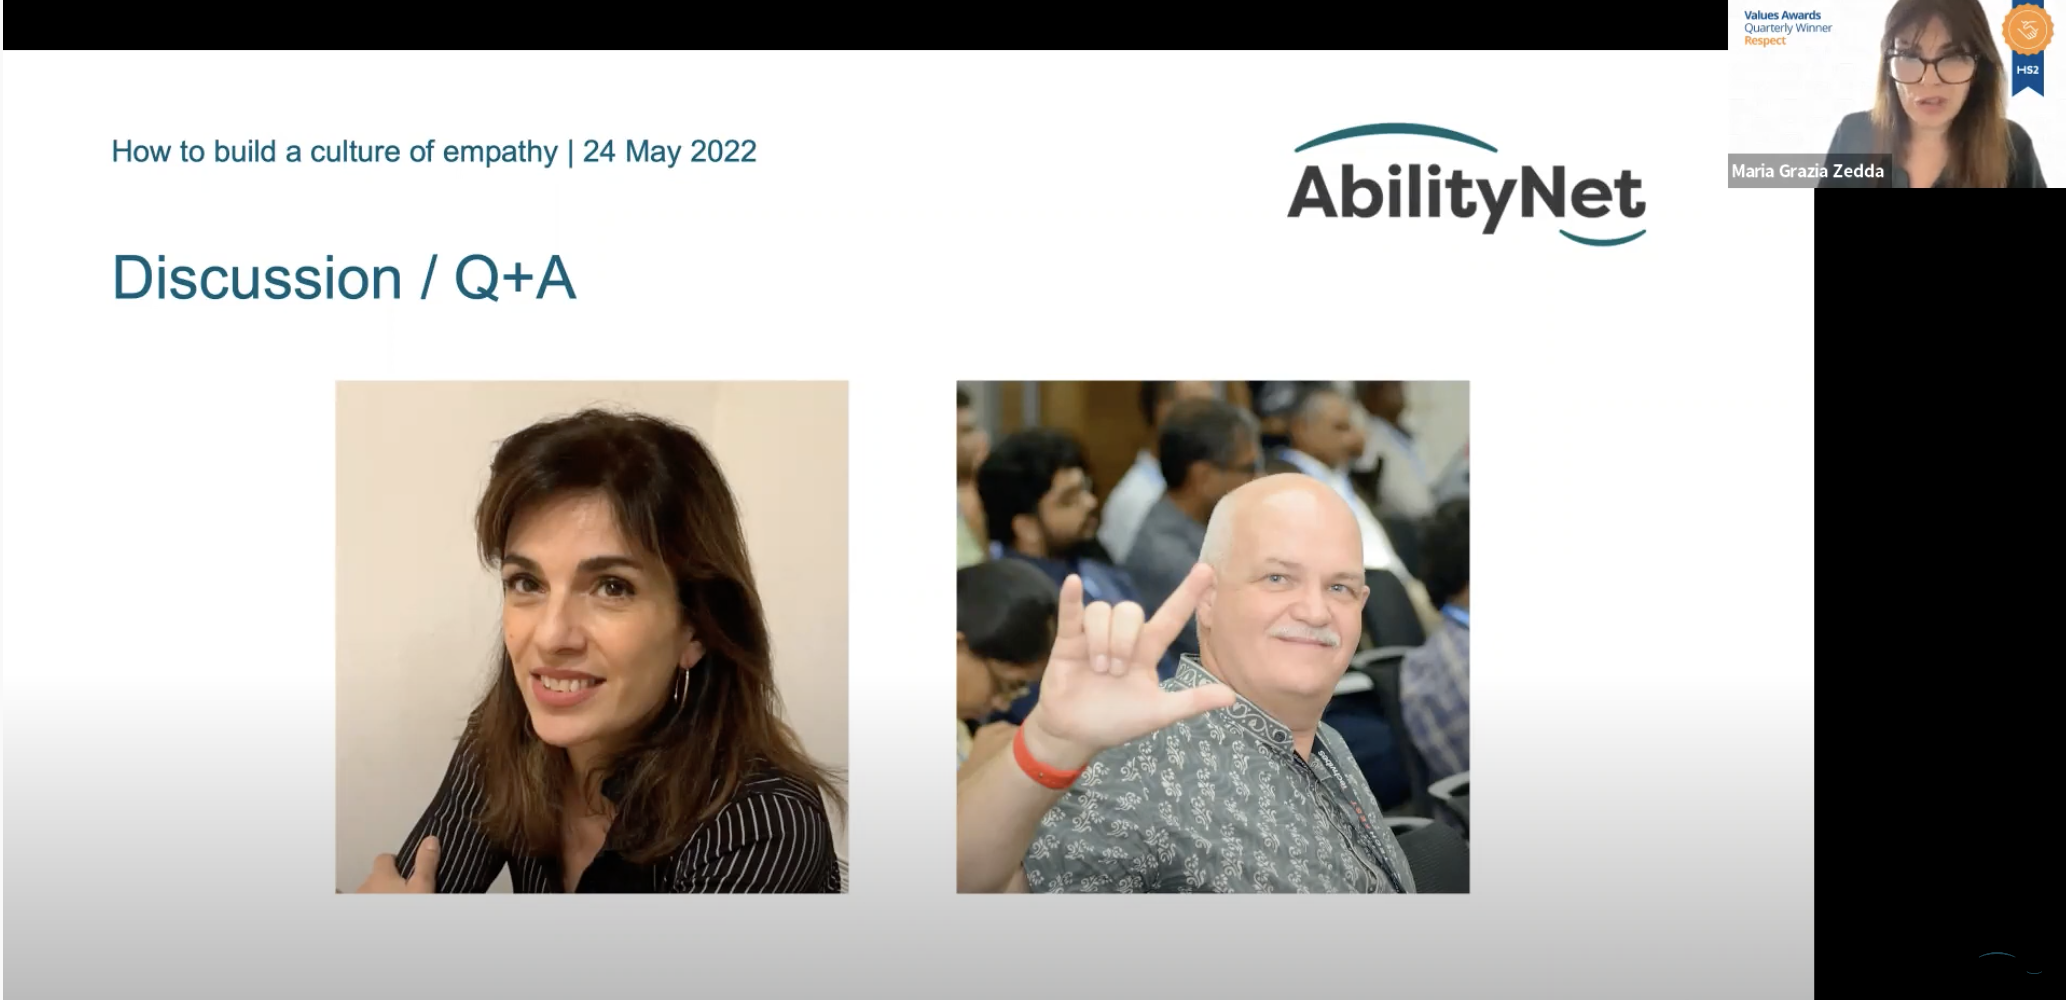 Screenshot from our building a culture of empathy webinar. Maria talking over a PowerPoint slide titled 'Discussion / Q+A' with profile images of Maria and Ted.